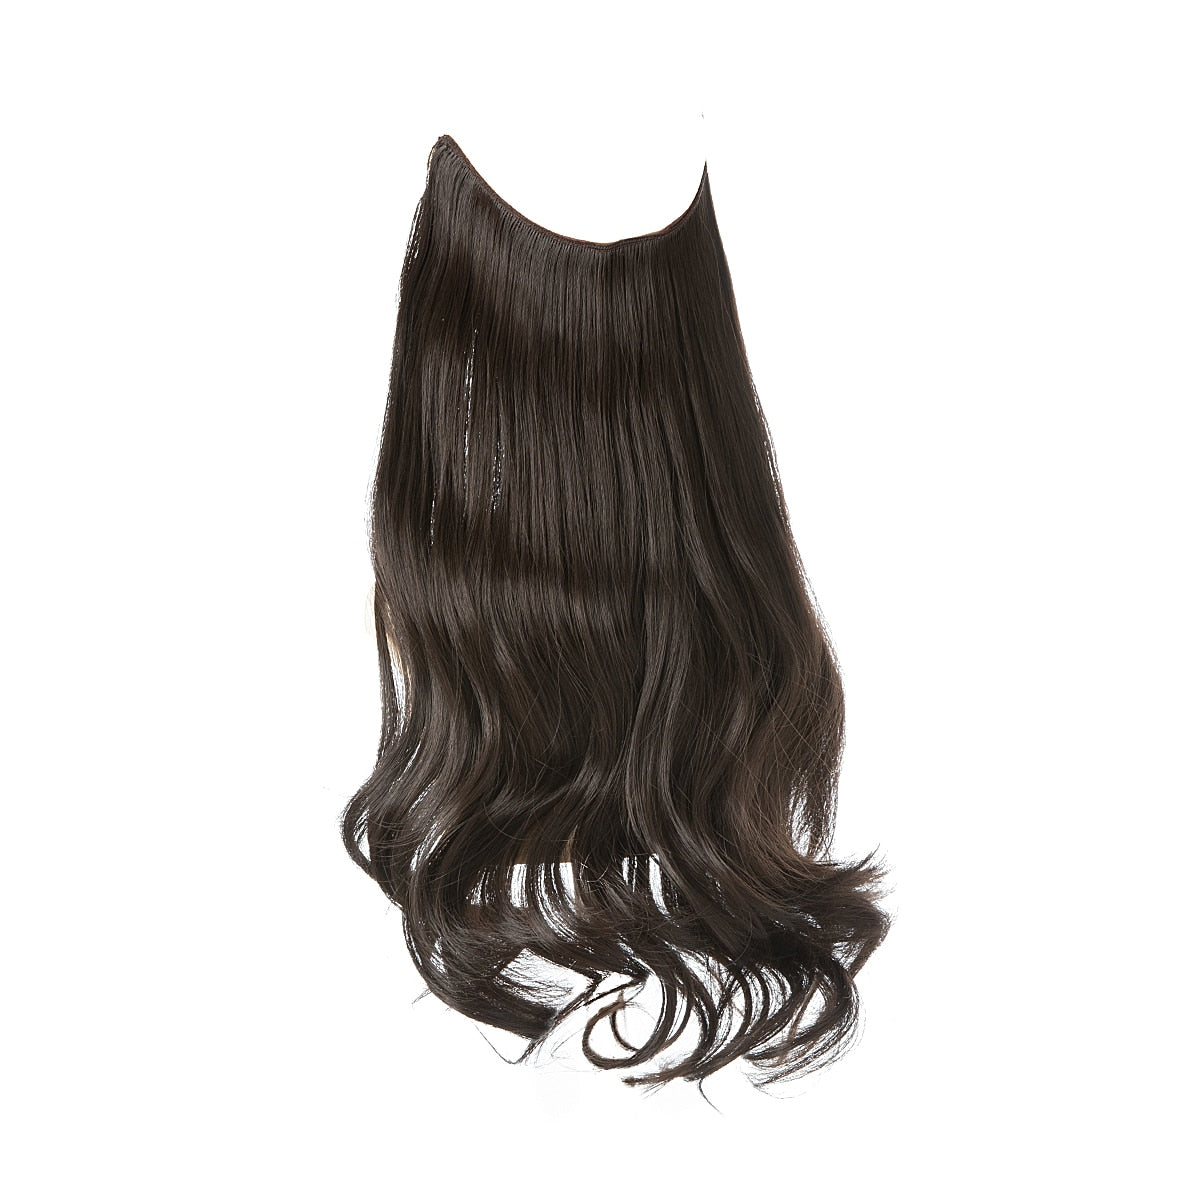 TEEK - Invisible Synth No Clip No Comb Wave Hair Extensions | Dark Varieties HAIR theteekdotcom Dark Brown 14inches 